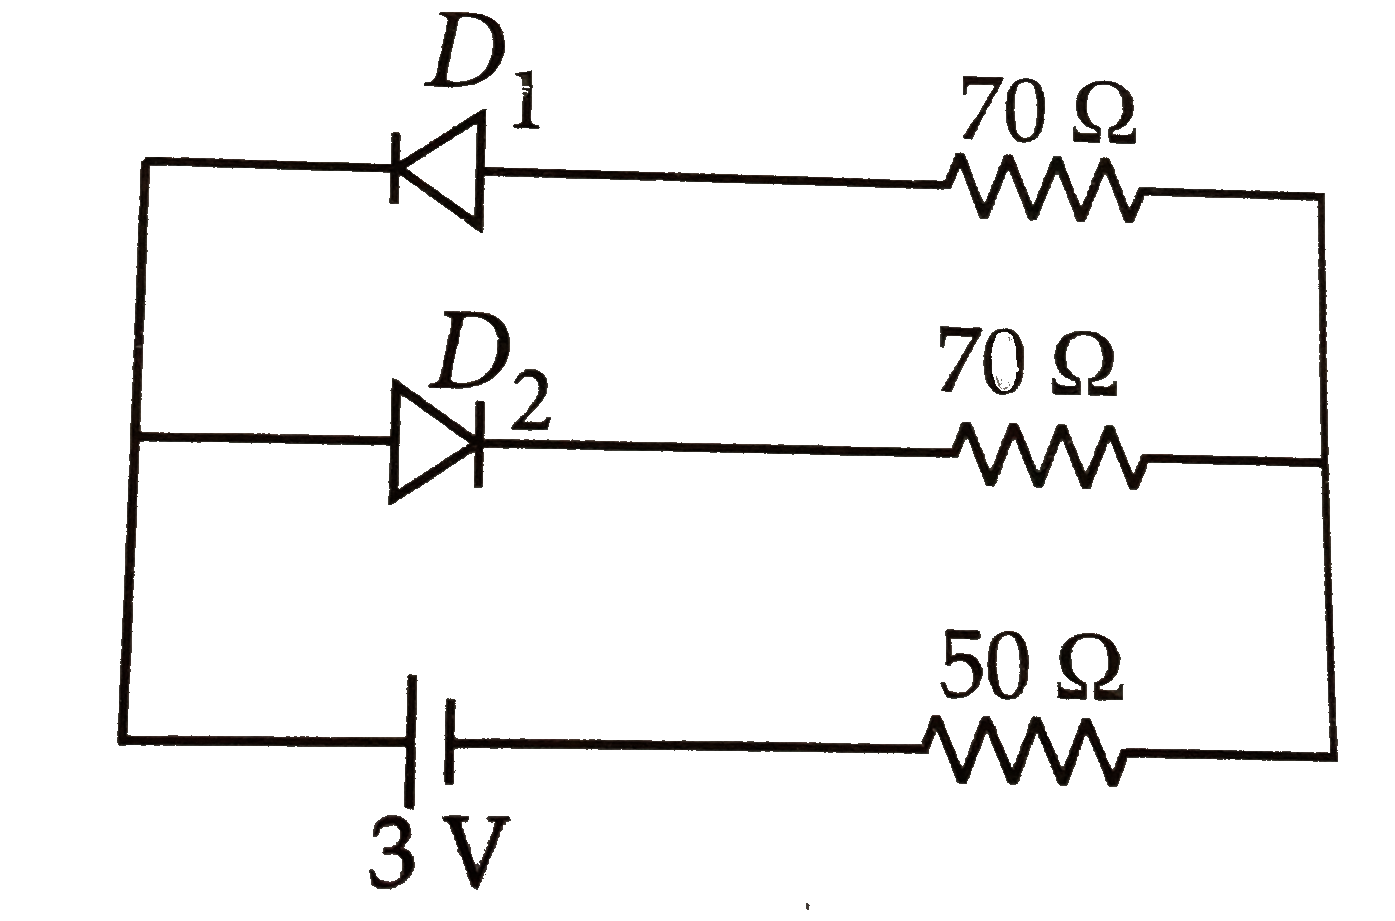 The circuit shown in the figure contains two diodes each with a forward resistance of 30 Omega and with infinite backward resistance. If the battery is 3 V, the current through the 50 Omega resistance (in ampere) is